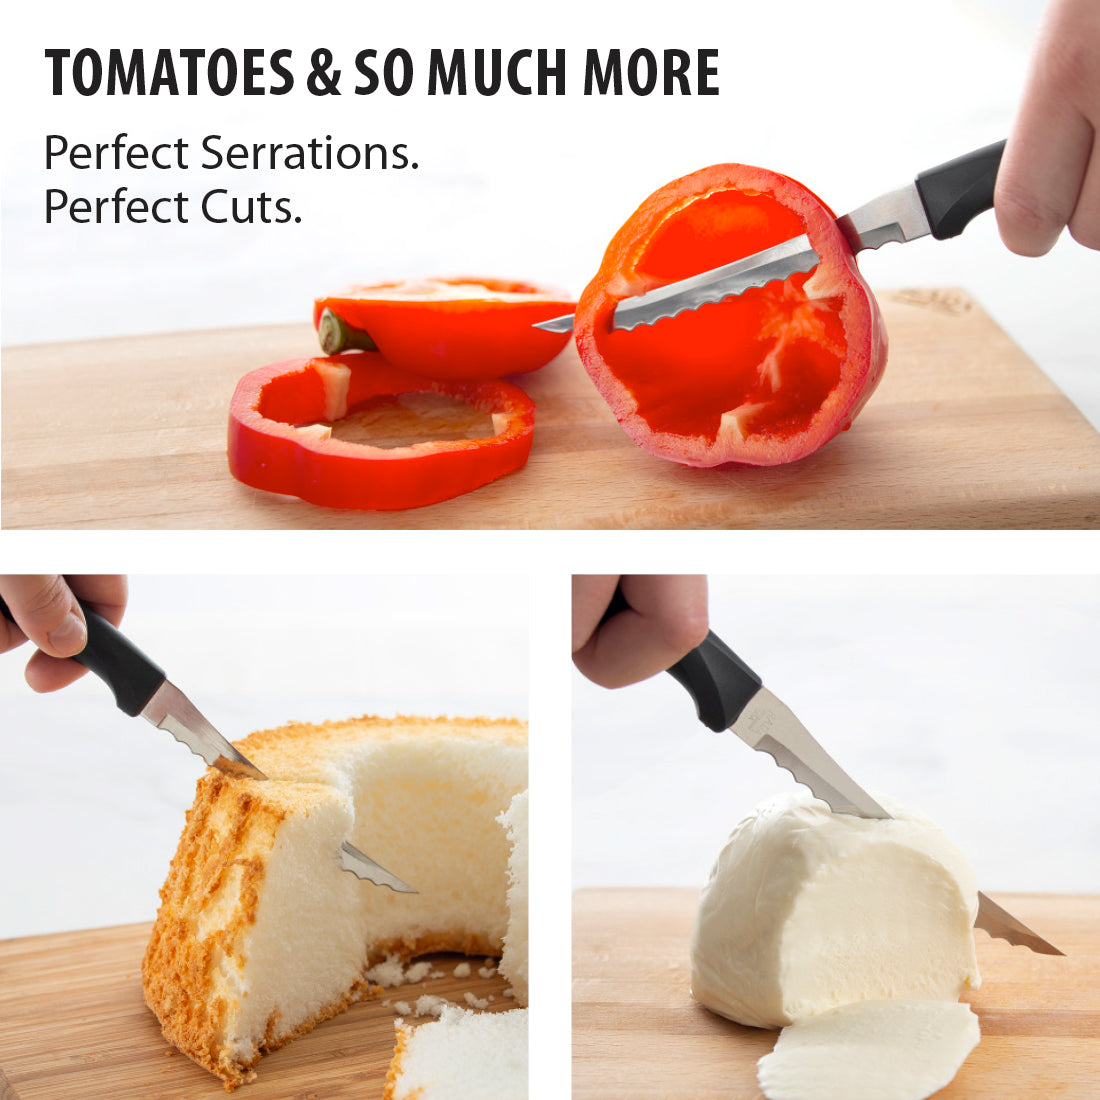 An Anthem Wave Tomato Slicer on a tan cutting board with sliced tomatoes